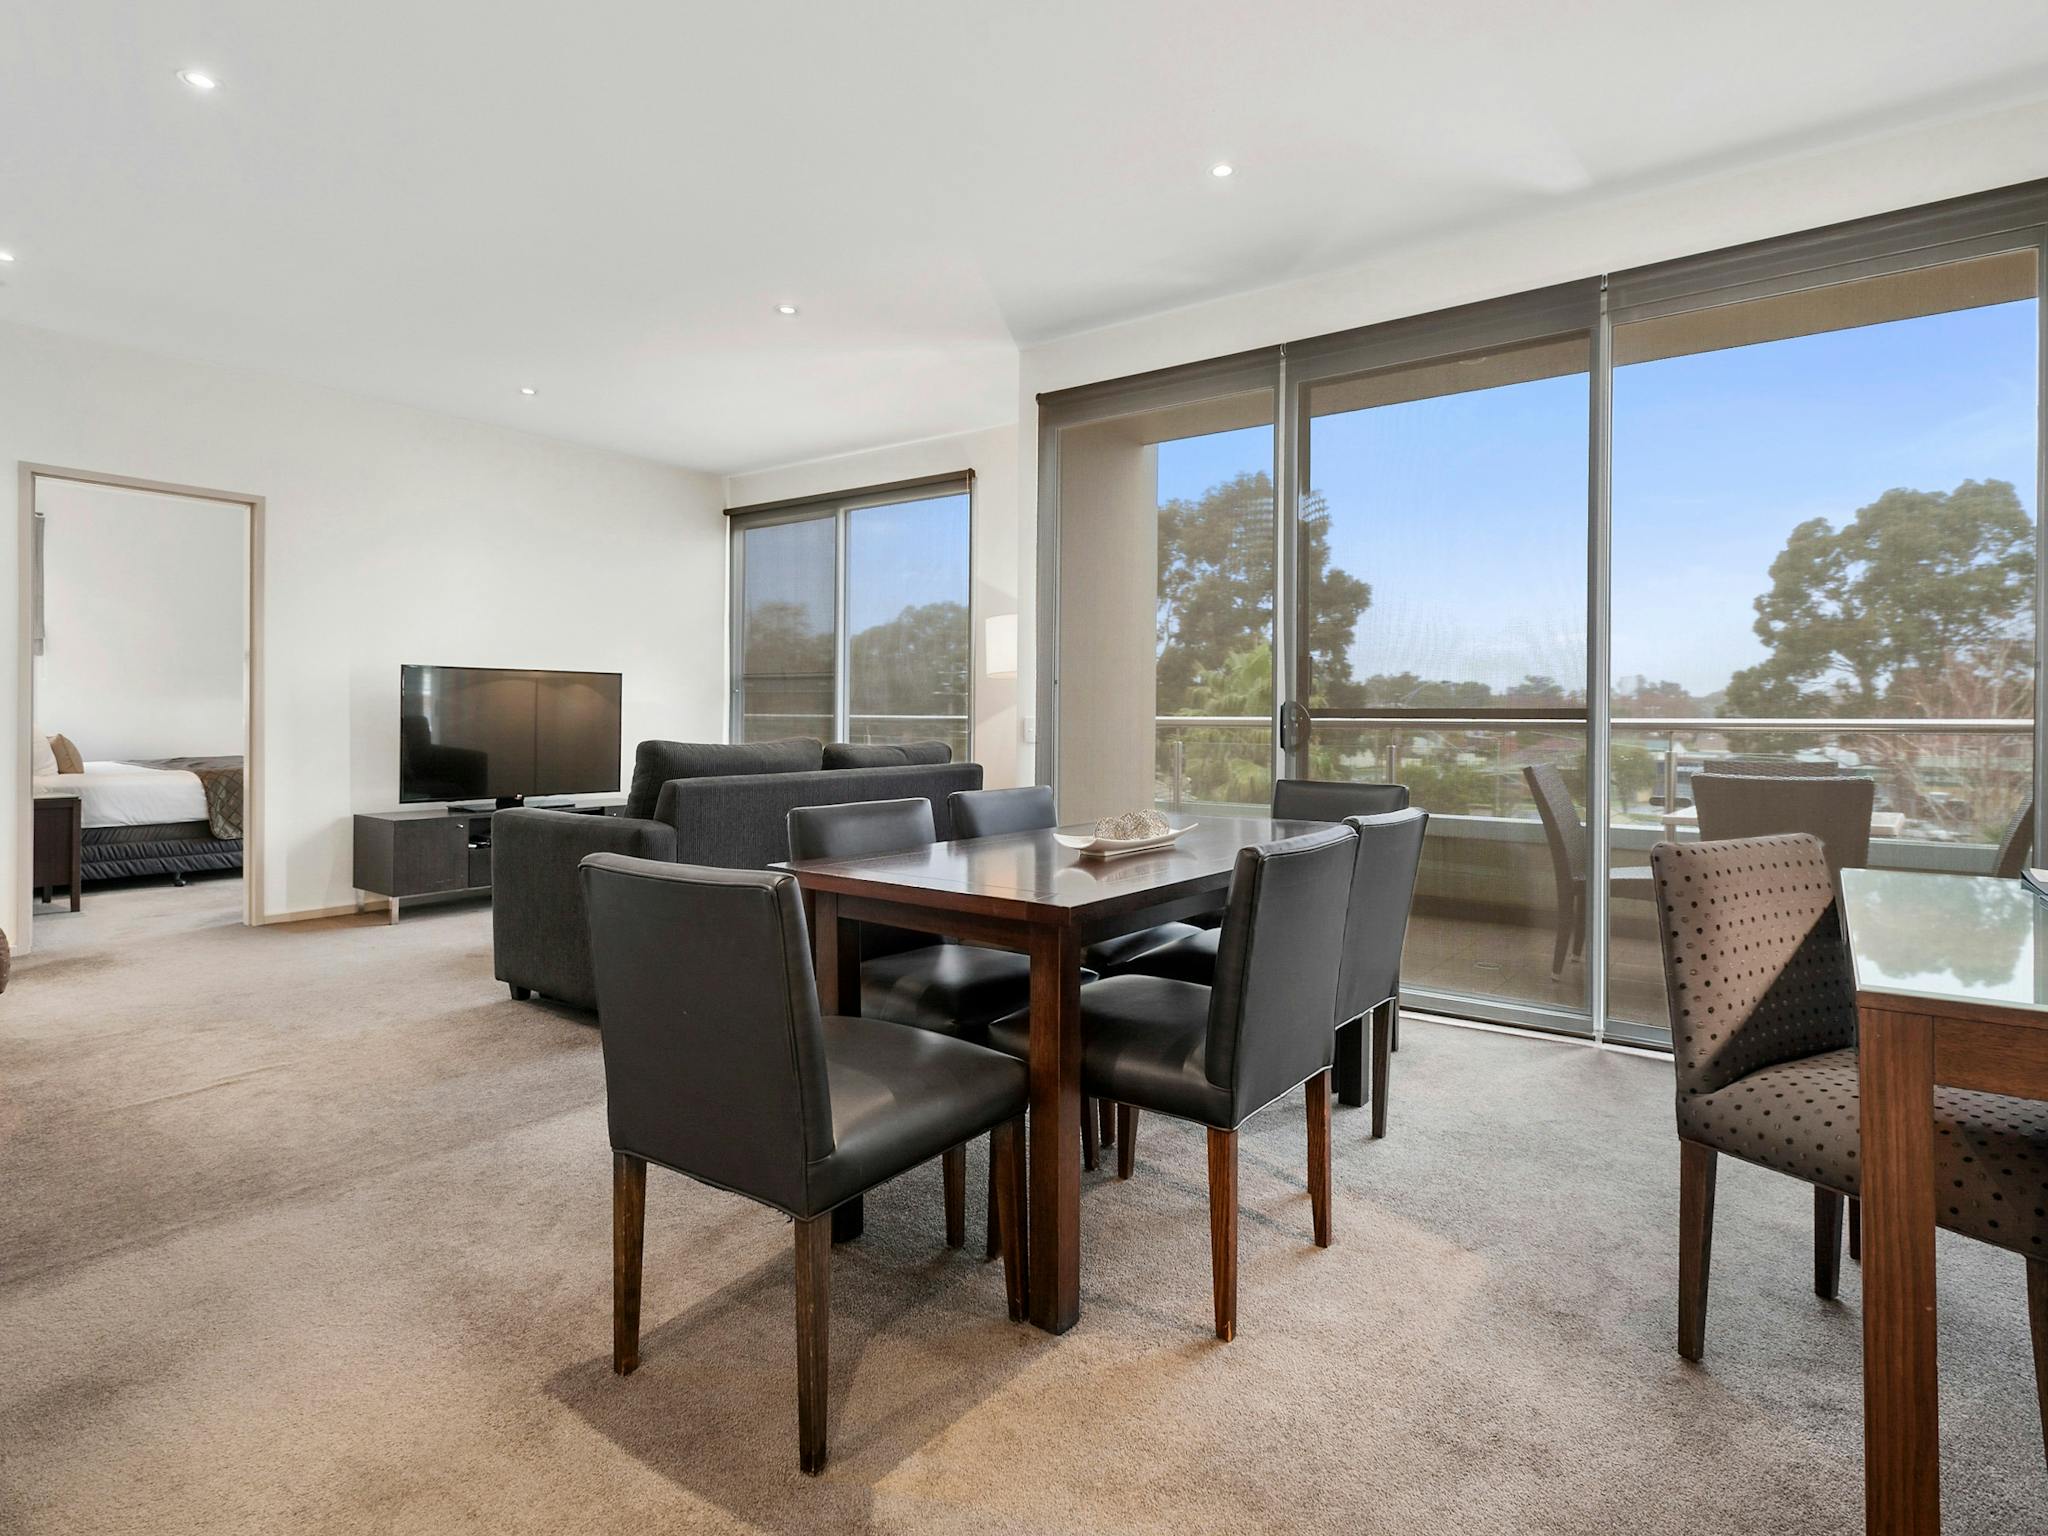 The Gateway's Two Bedroom Apartments include dining, lounge and outdoor balcony